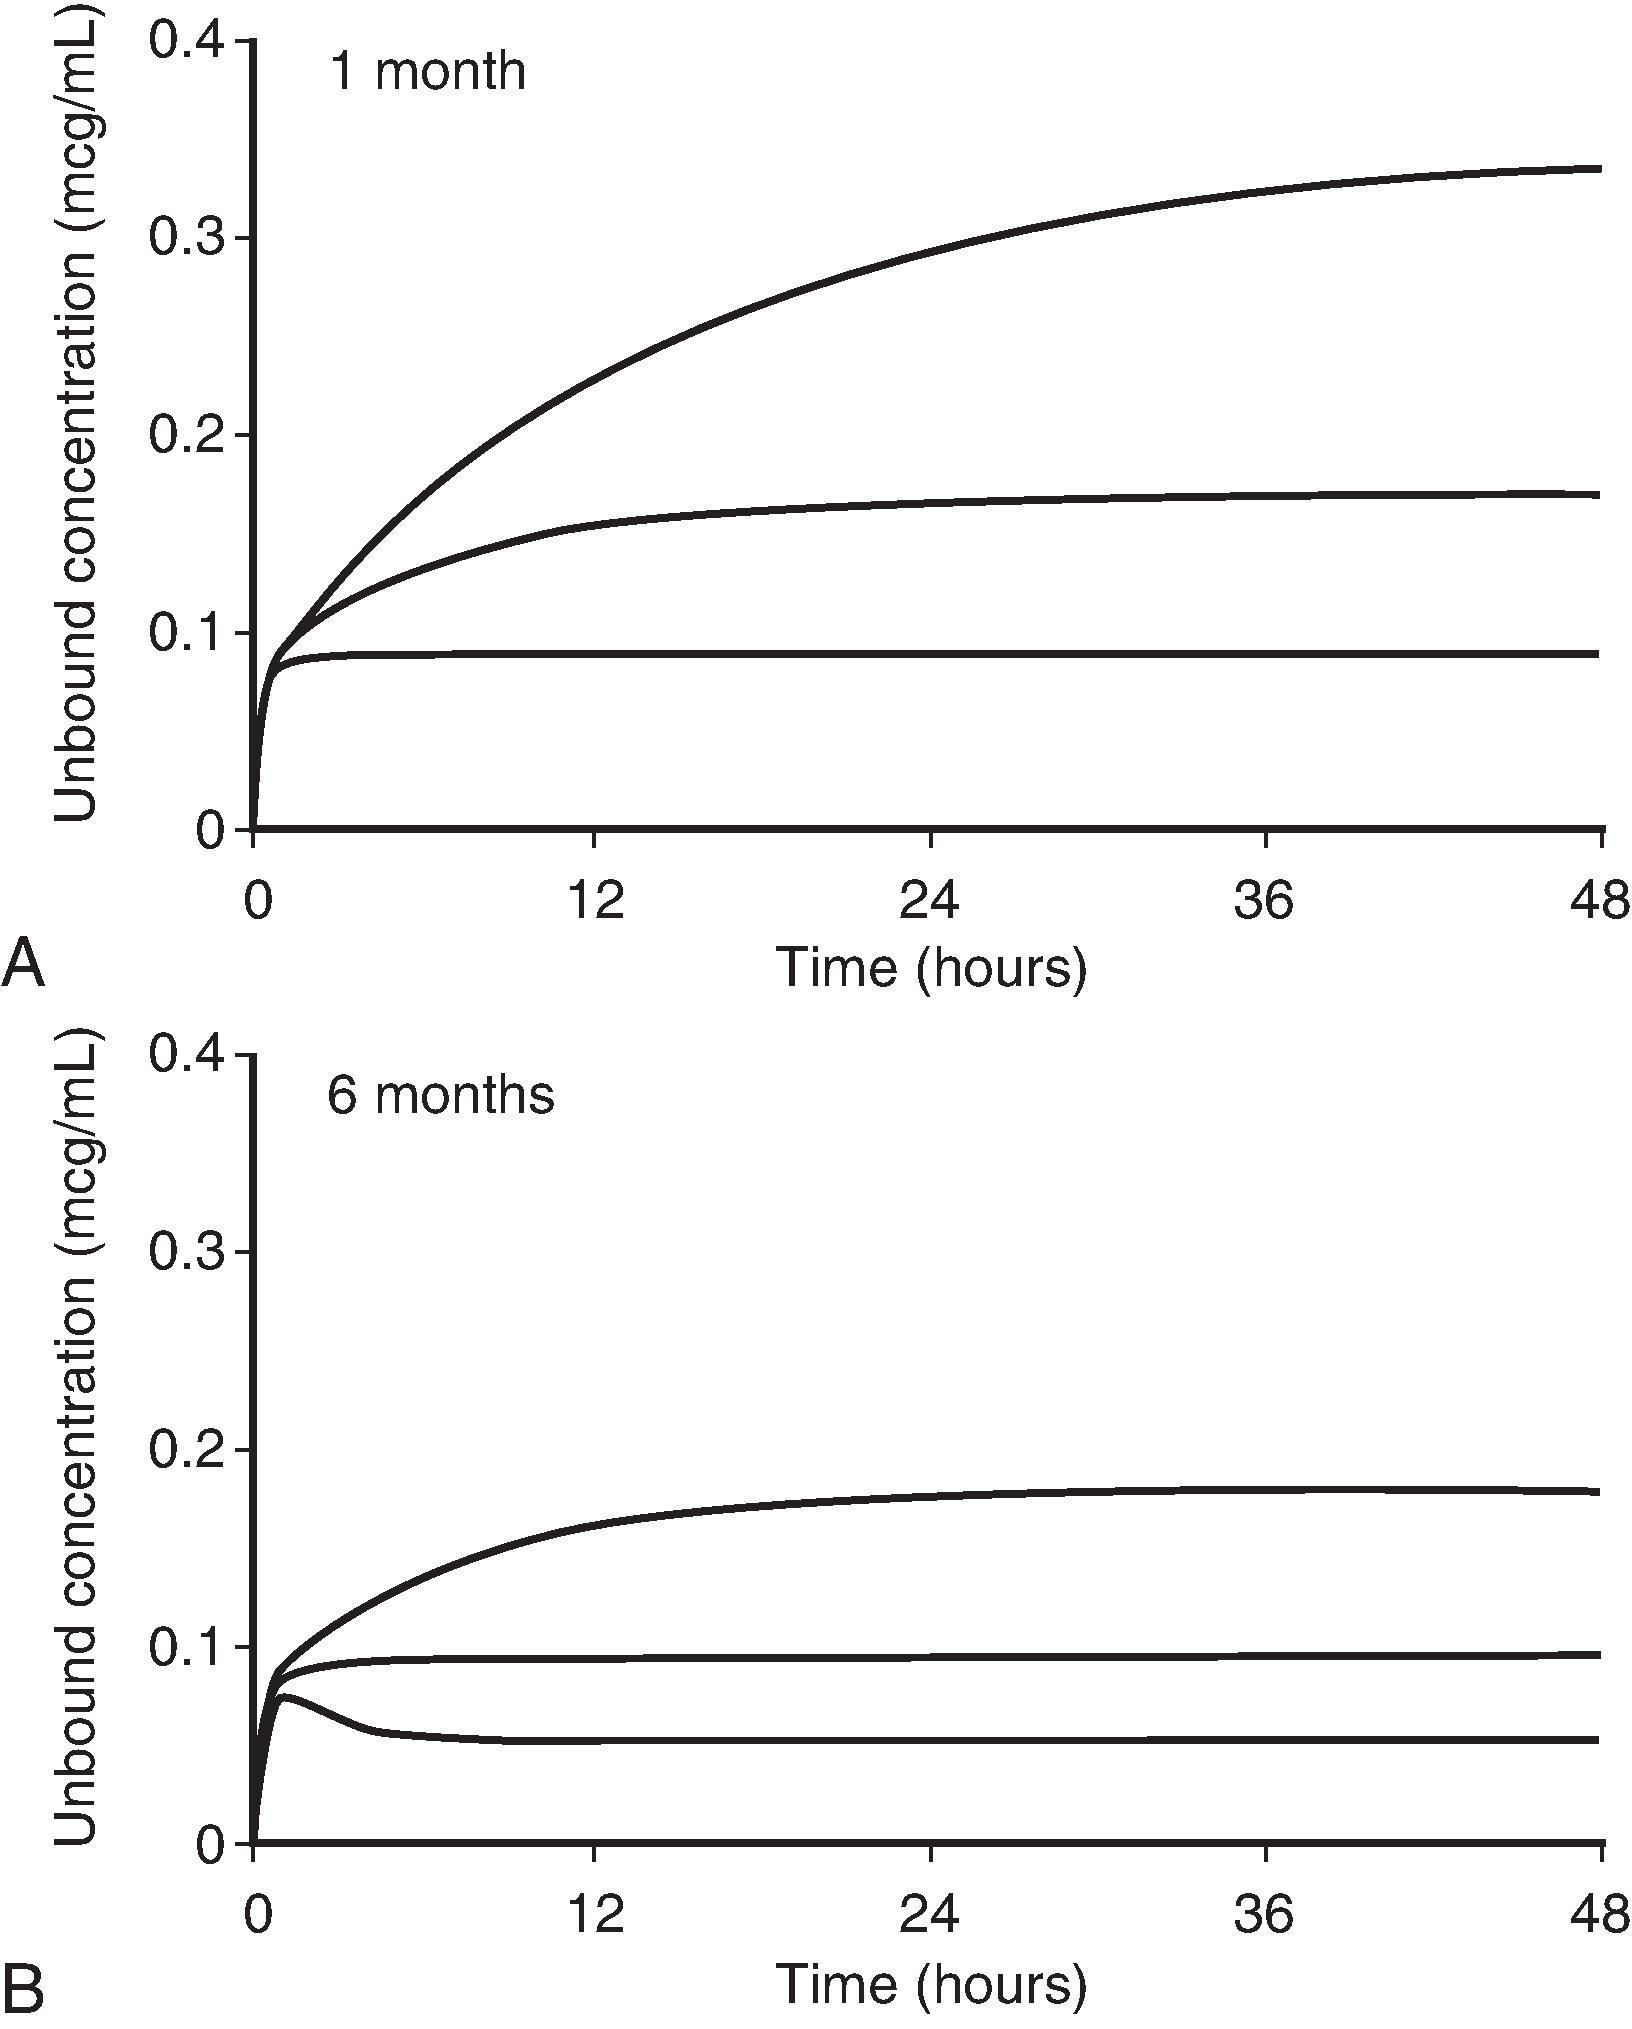 FIG. 53.2, Simulation of Unbound Bupivacaine Concentration During 48-Hour Infusion in Infants Aged 1 Month (A) and 6 Months (B) .